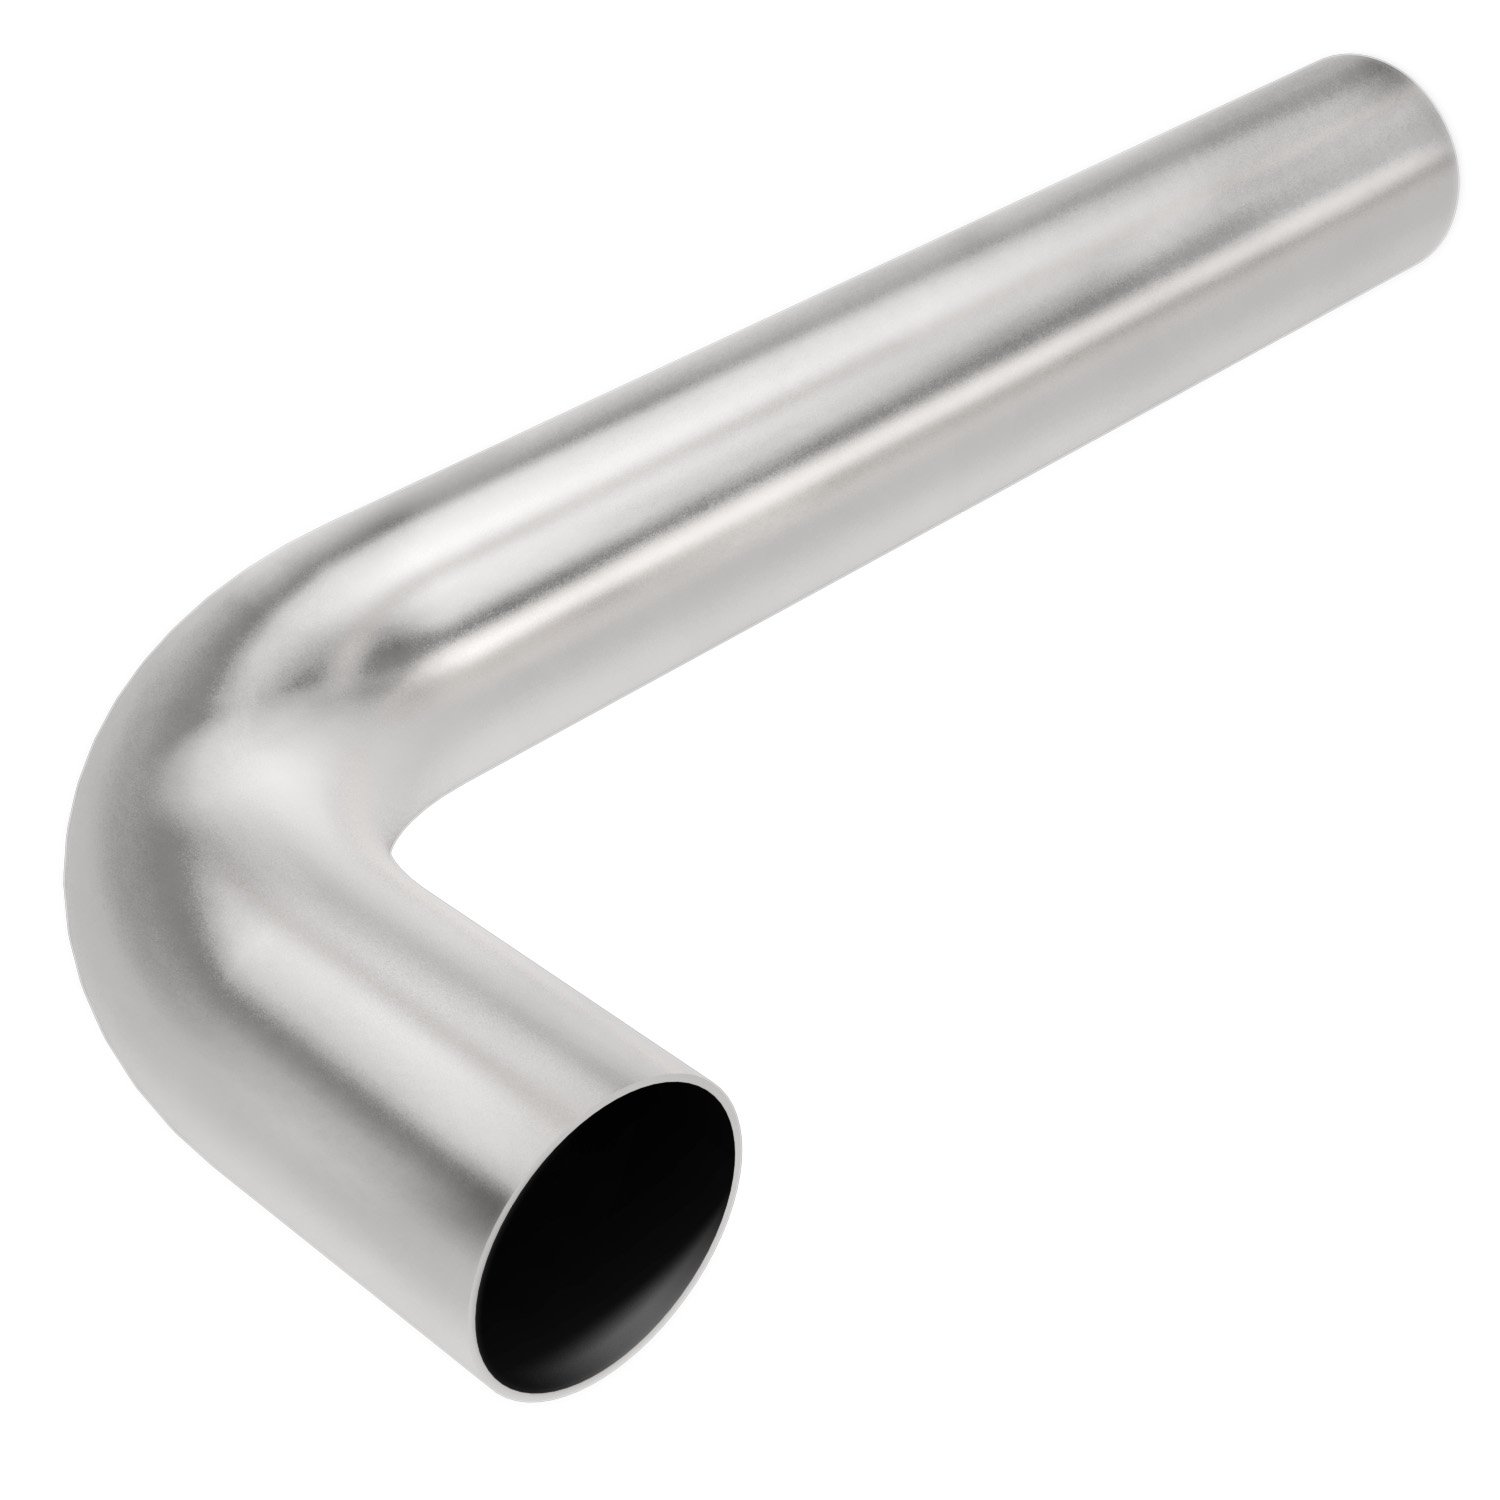 Stainless Steel 90° Transition Exhaust Pipes Outside Diameter: 2.5"